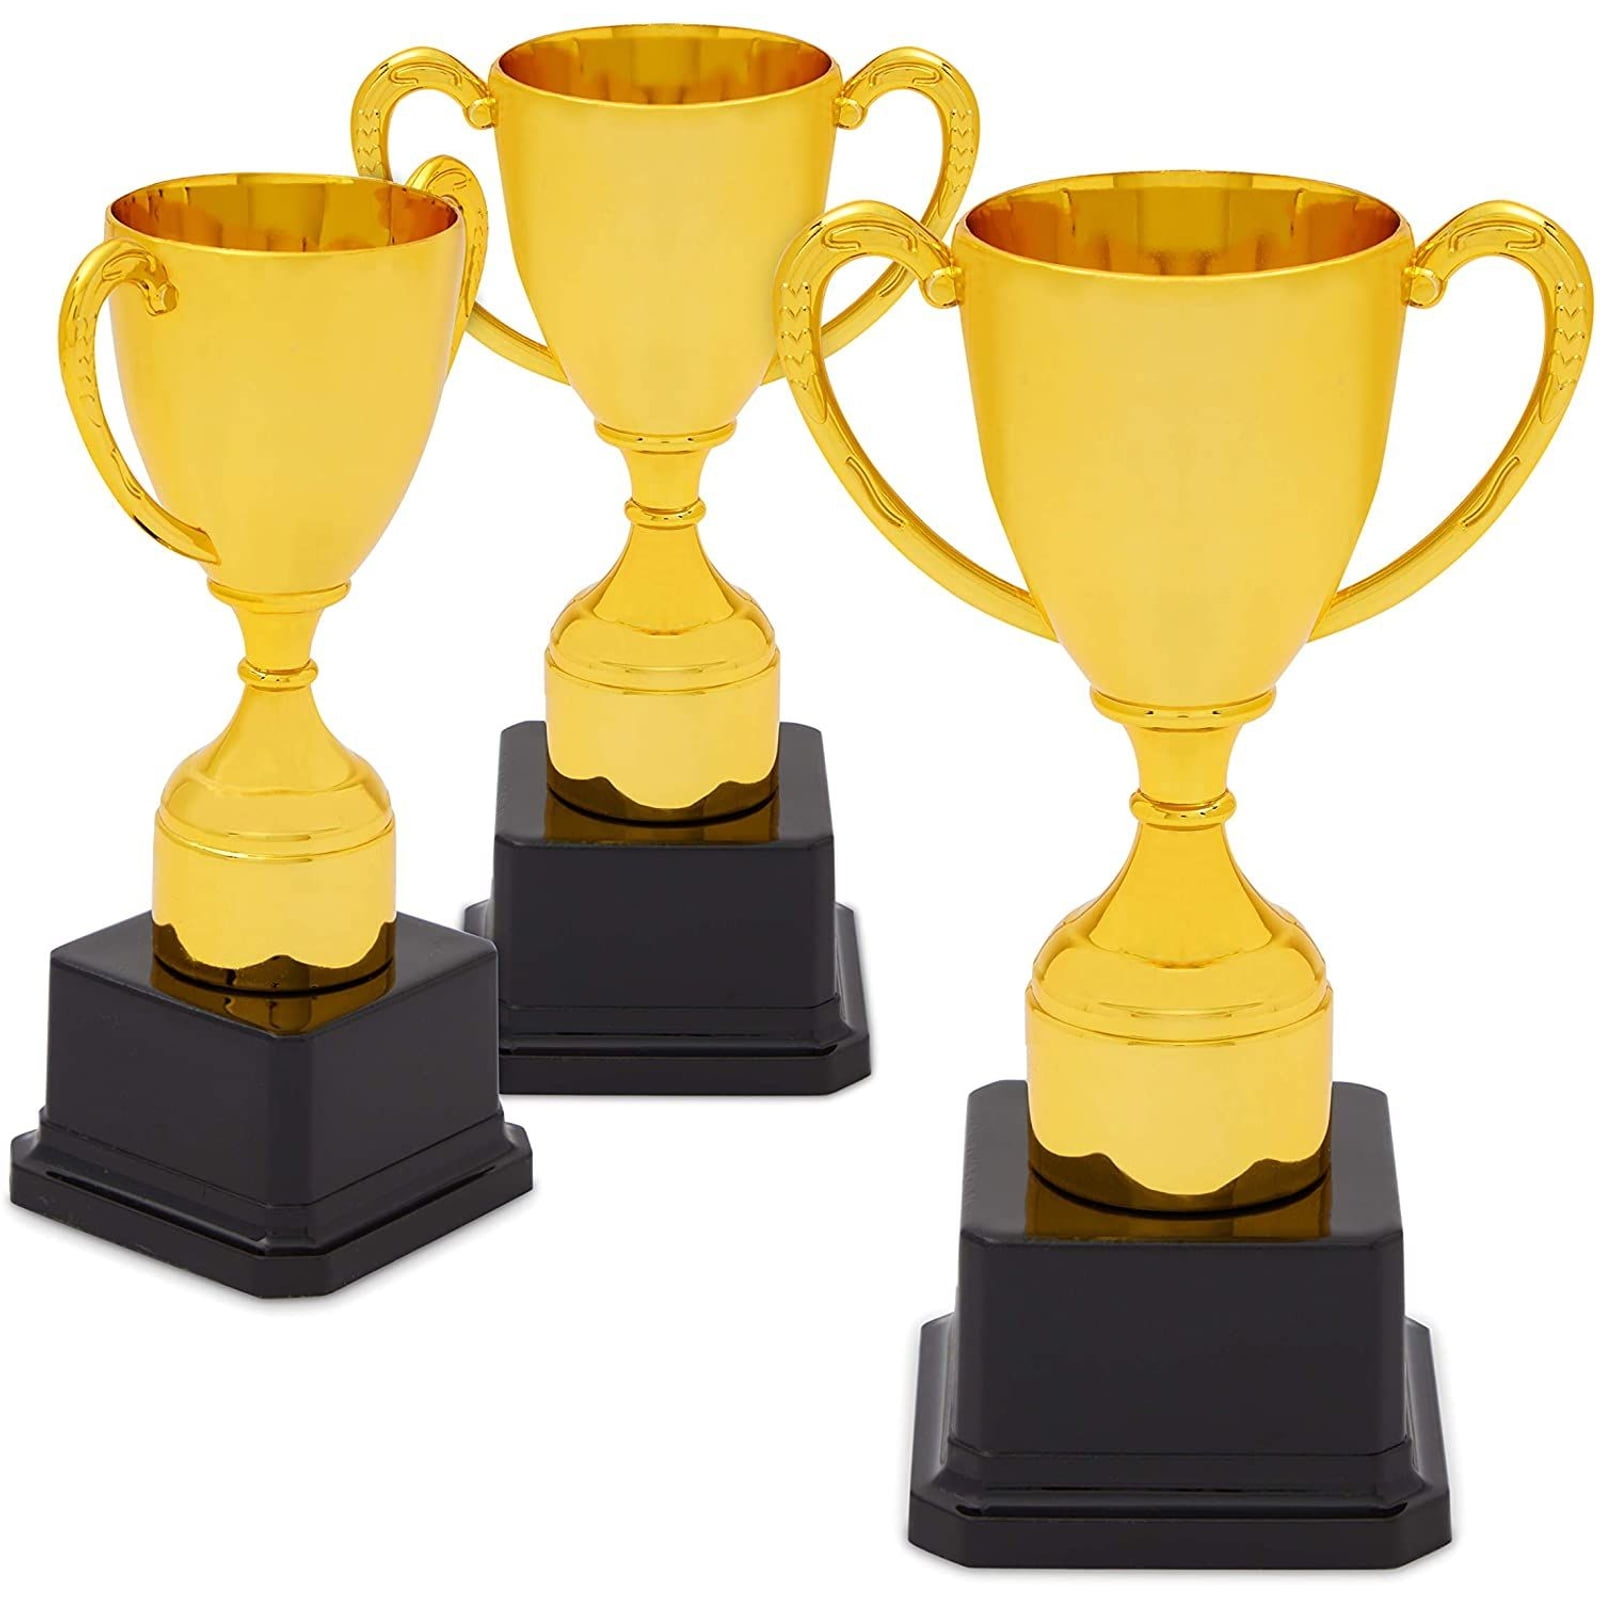 'COACH THANK YOU' FOOTBALL TROPHY FREE ENGRAVING & CENTRES 5 SIZES,SILVER/GOLD 